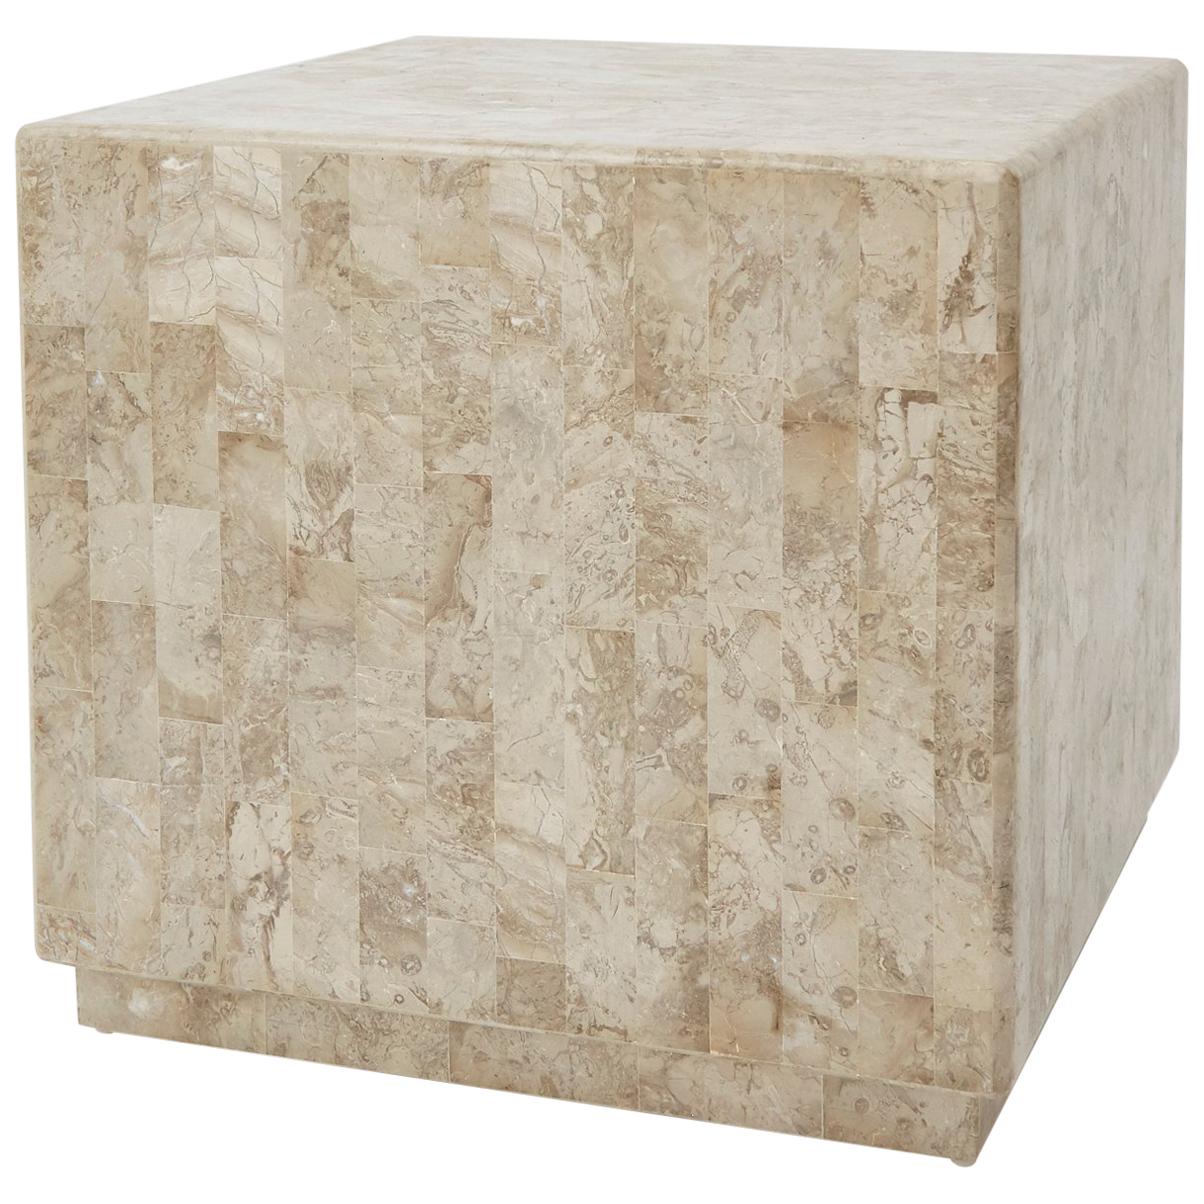 Tessellated Stone "Searfoss" Square Side Table, 1990s For Sale